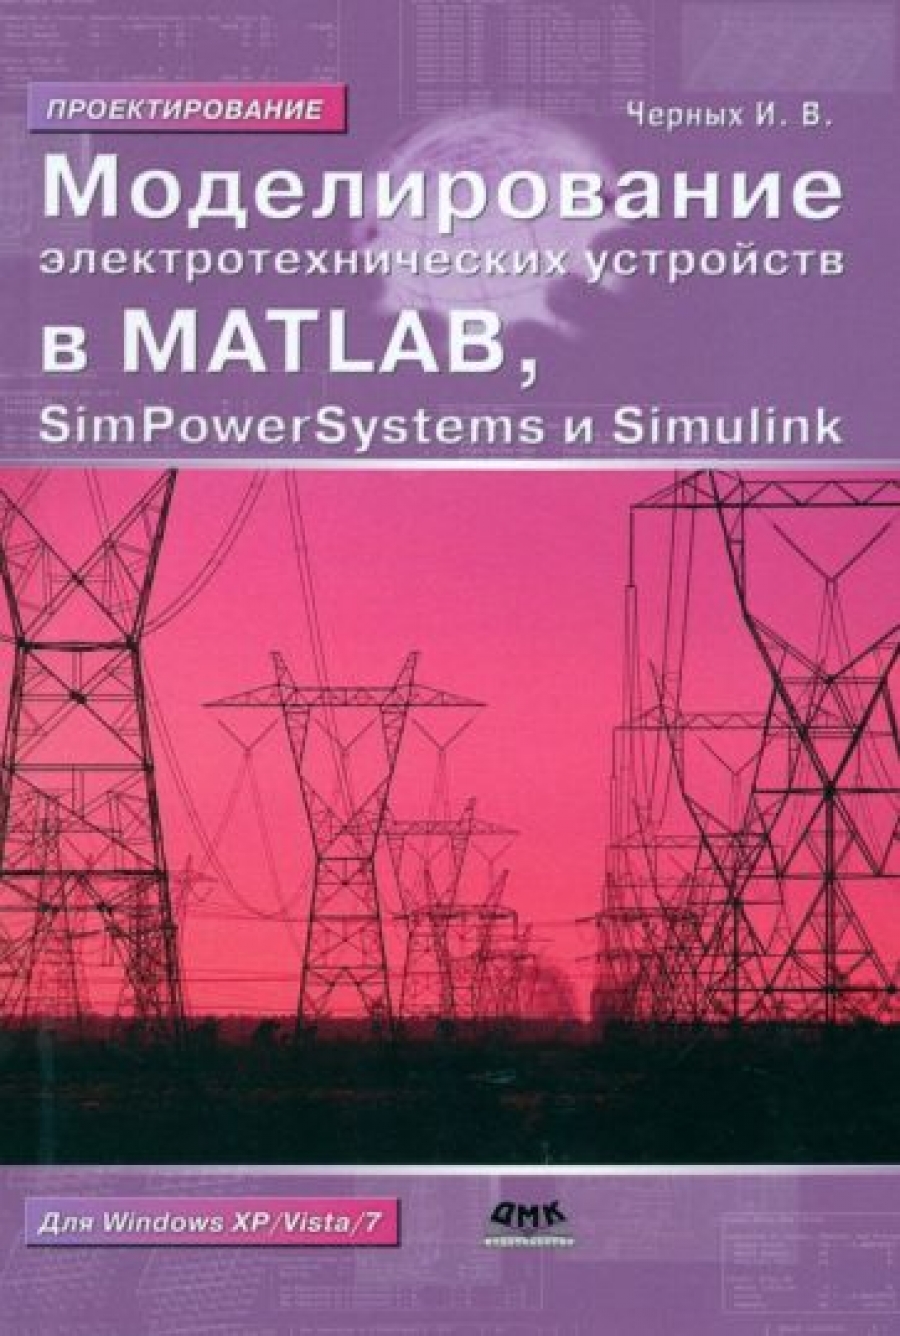  .     Matlab, SimPowerSystems  Simulink 